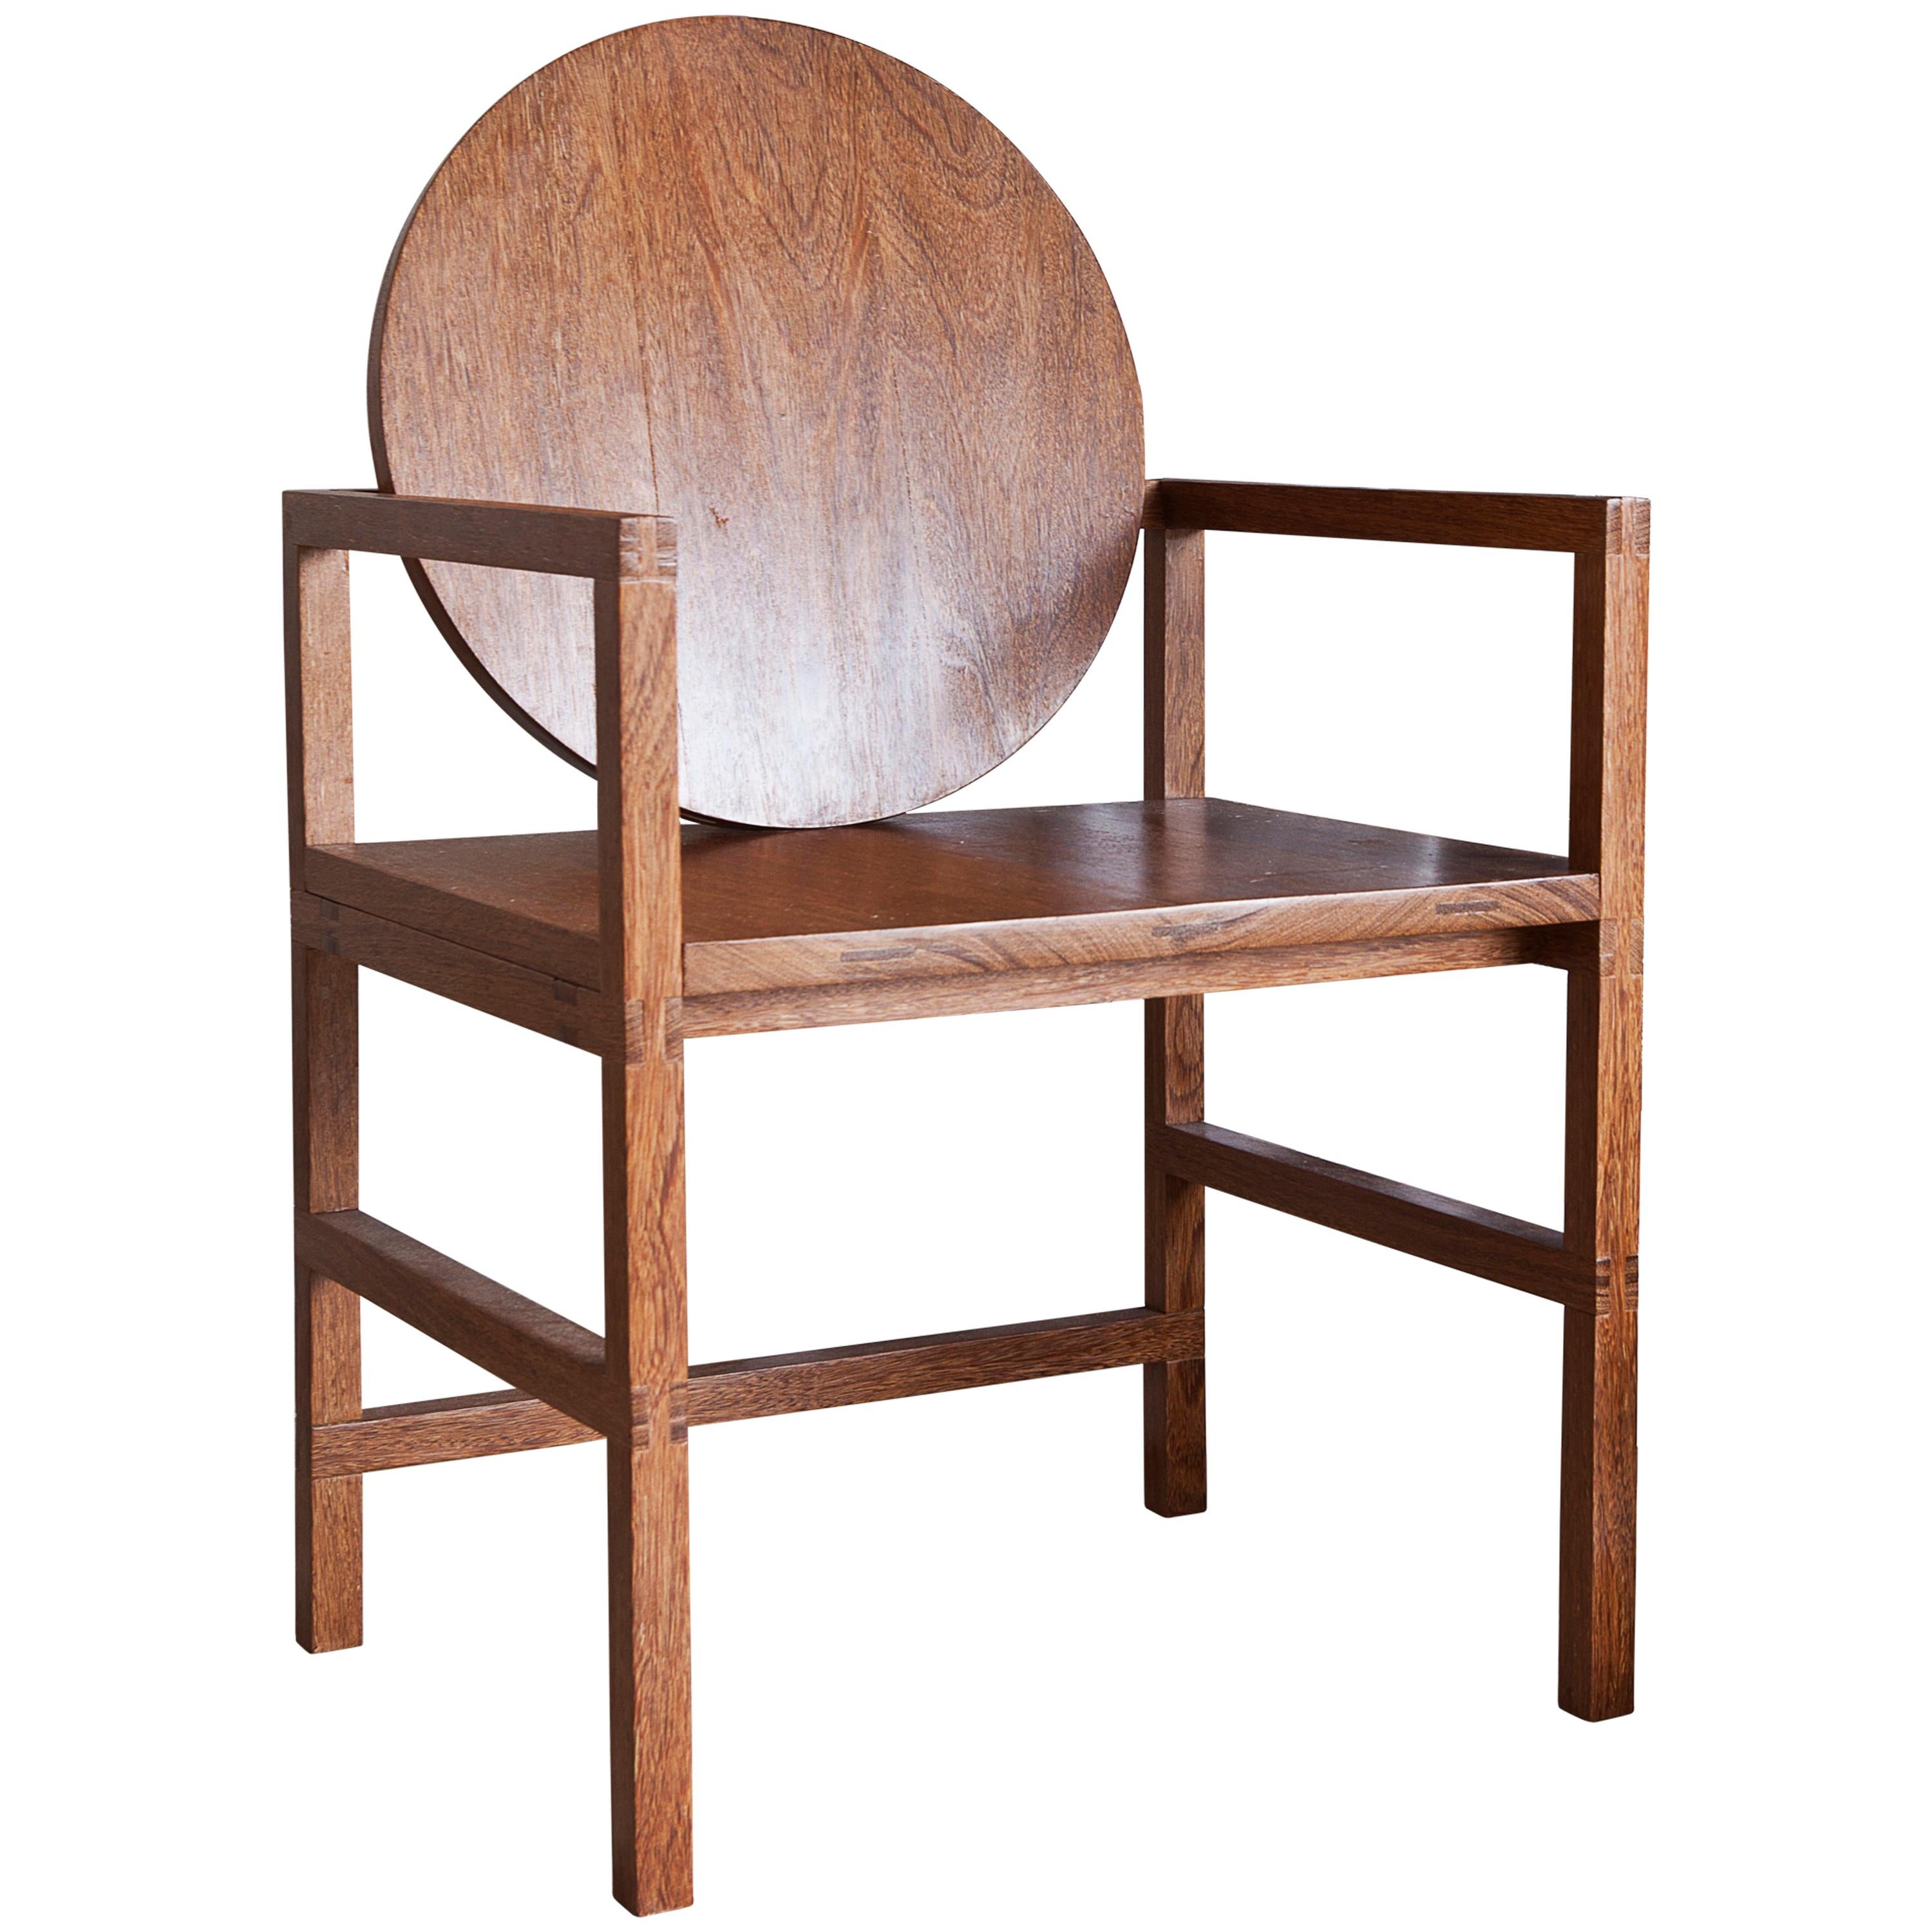 The Medallion Armchair is made in a contemporary design from a Brazilian hardwood called Sucupira